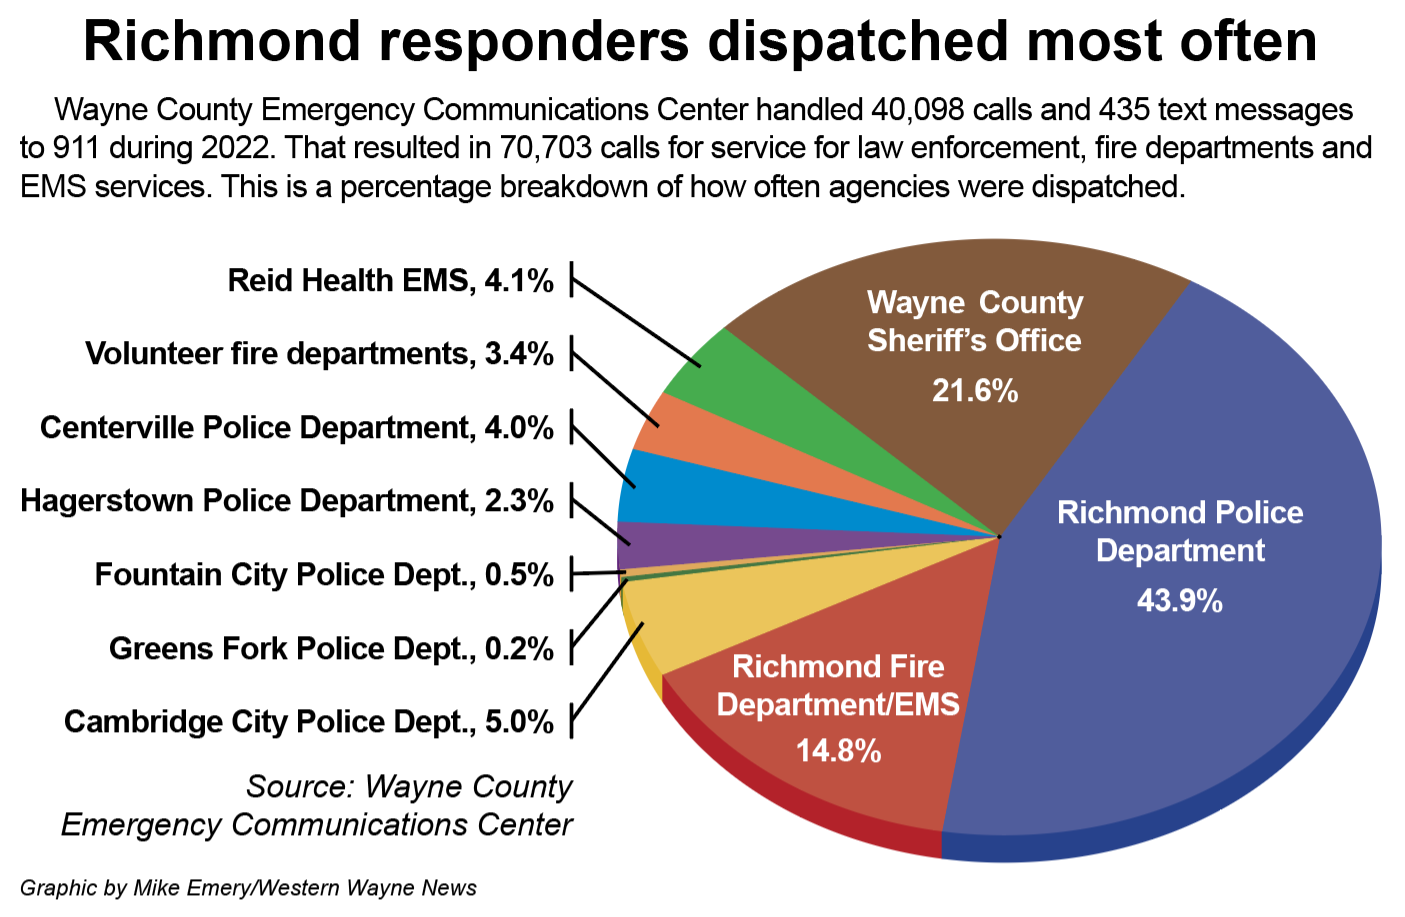 Wayne County Emergency Communications Center handled 40,098 calls and 435 text messages to 911 during 2022. That resulted in 70,703 calls for service for law enforcement, fire departments and EMS services. This image shows a percentage breakdown of how often agencies were dispatched.